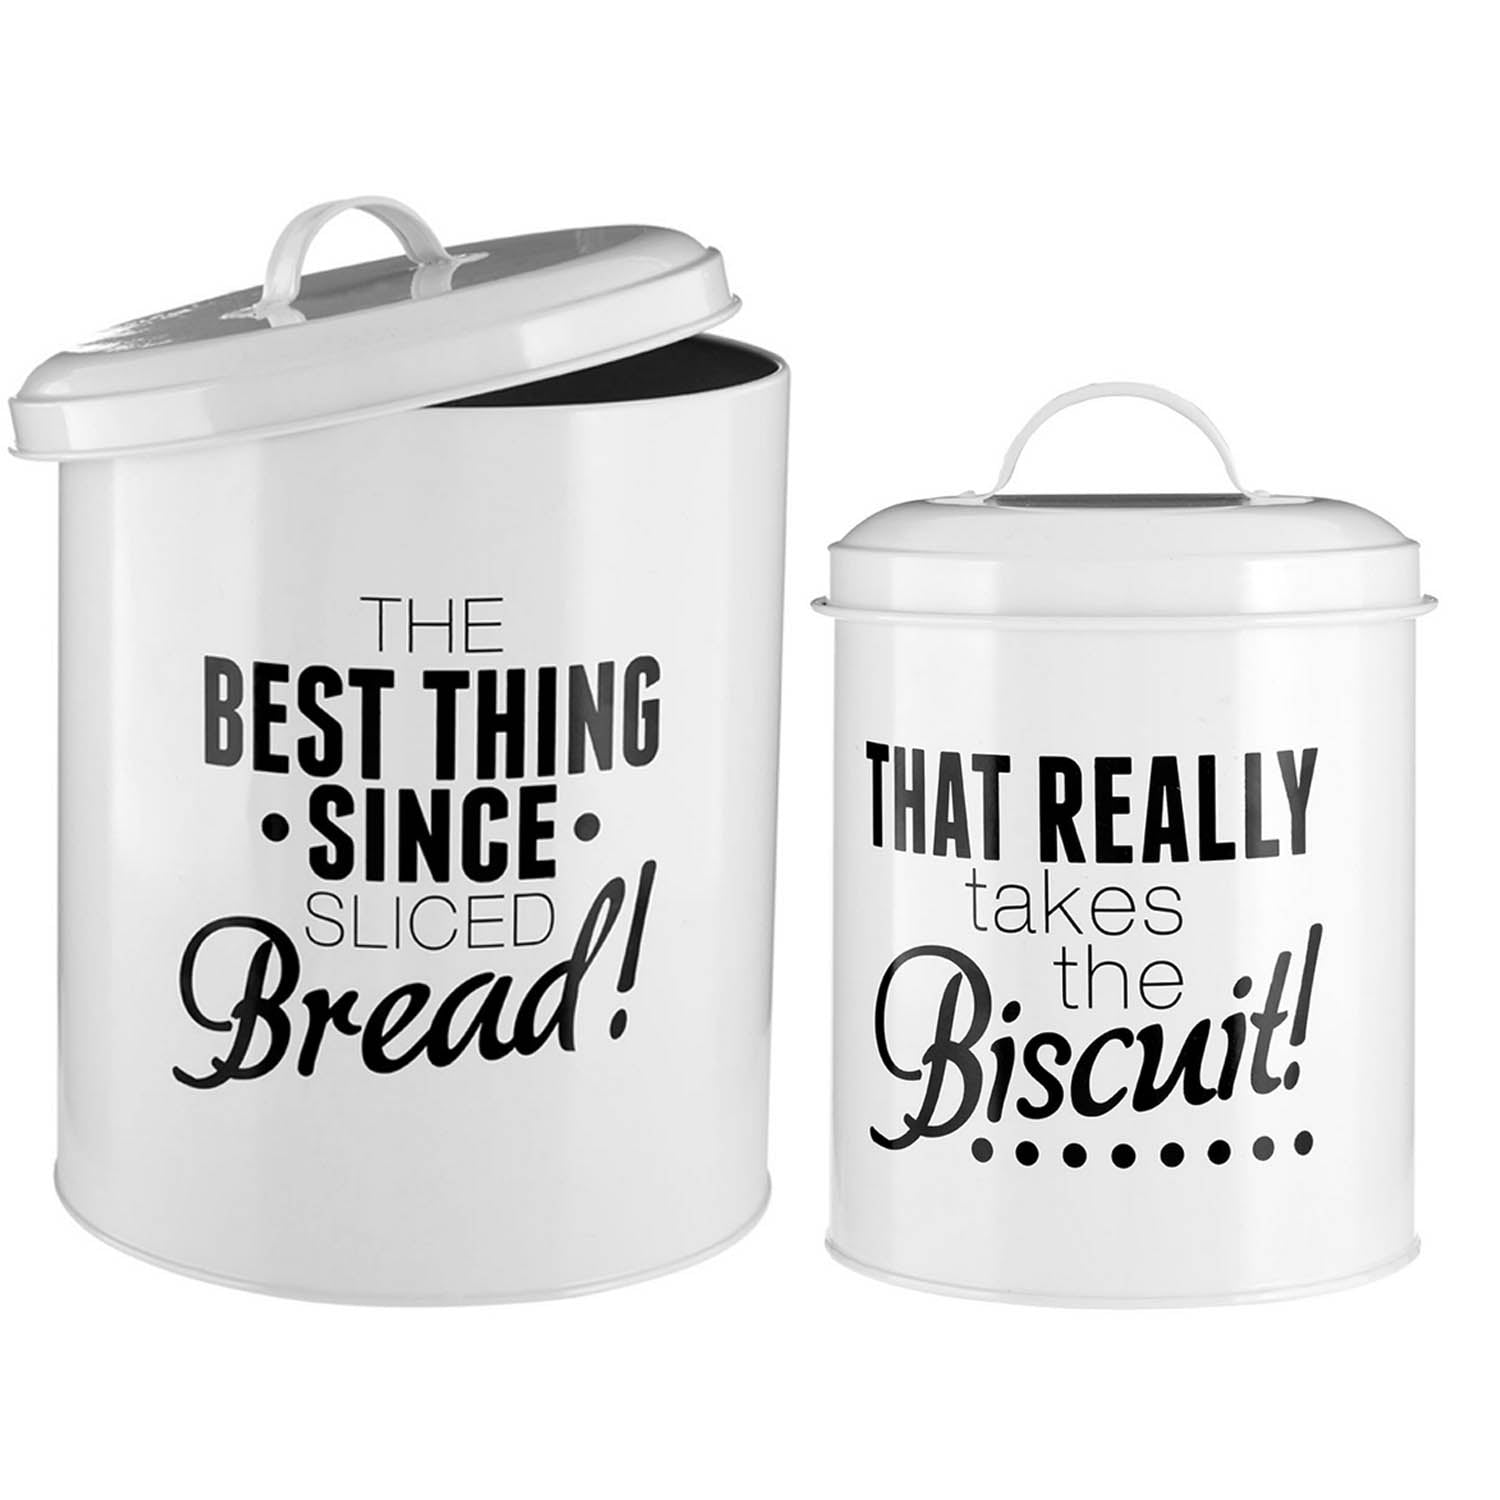 Set Of 2 Metal Bread Bin Biscuits Canisters